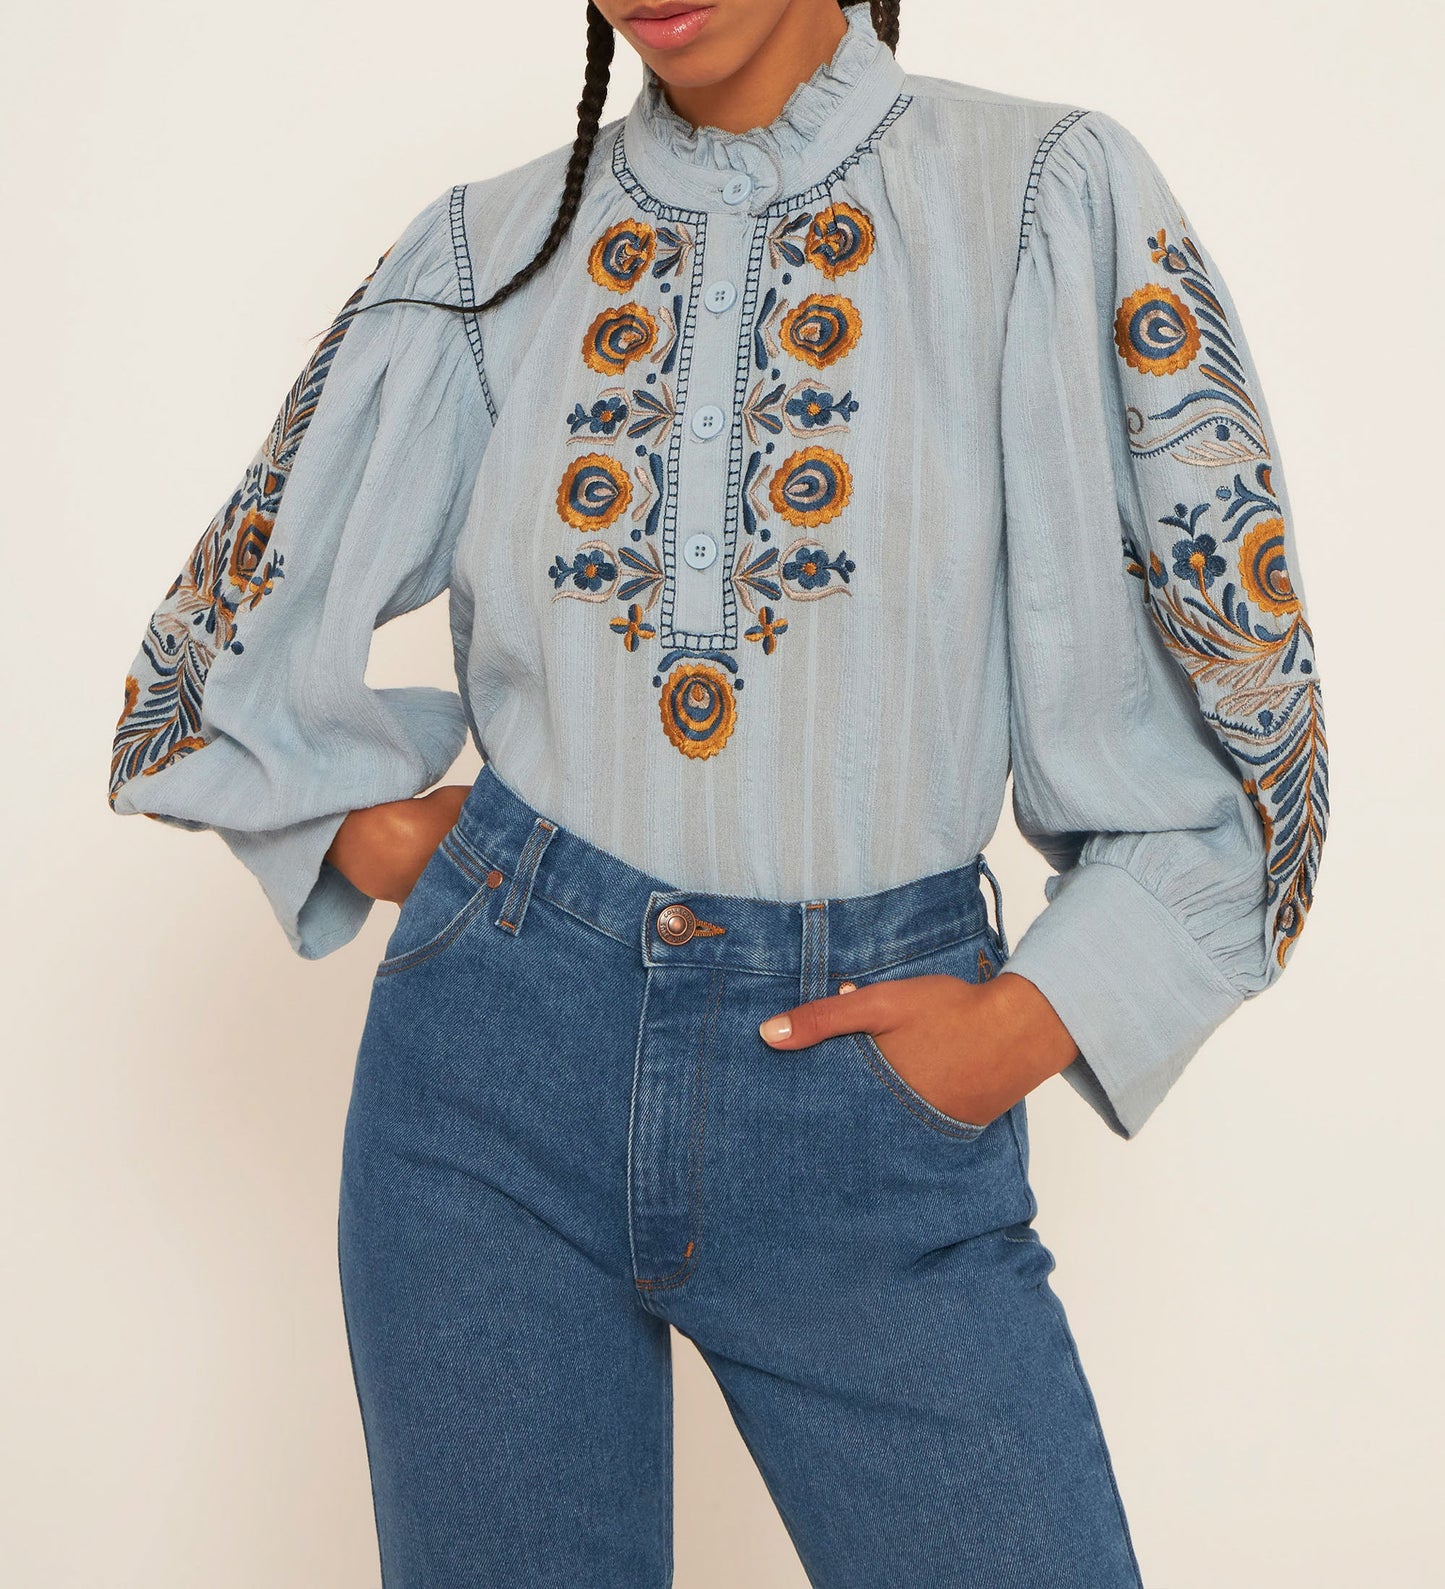 Igor embroidered blouse